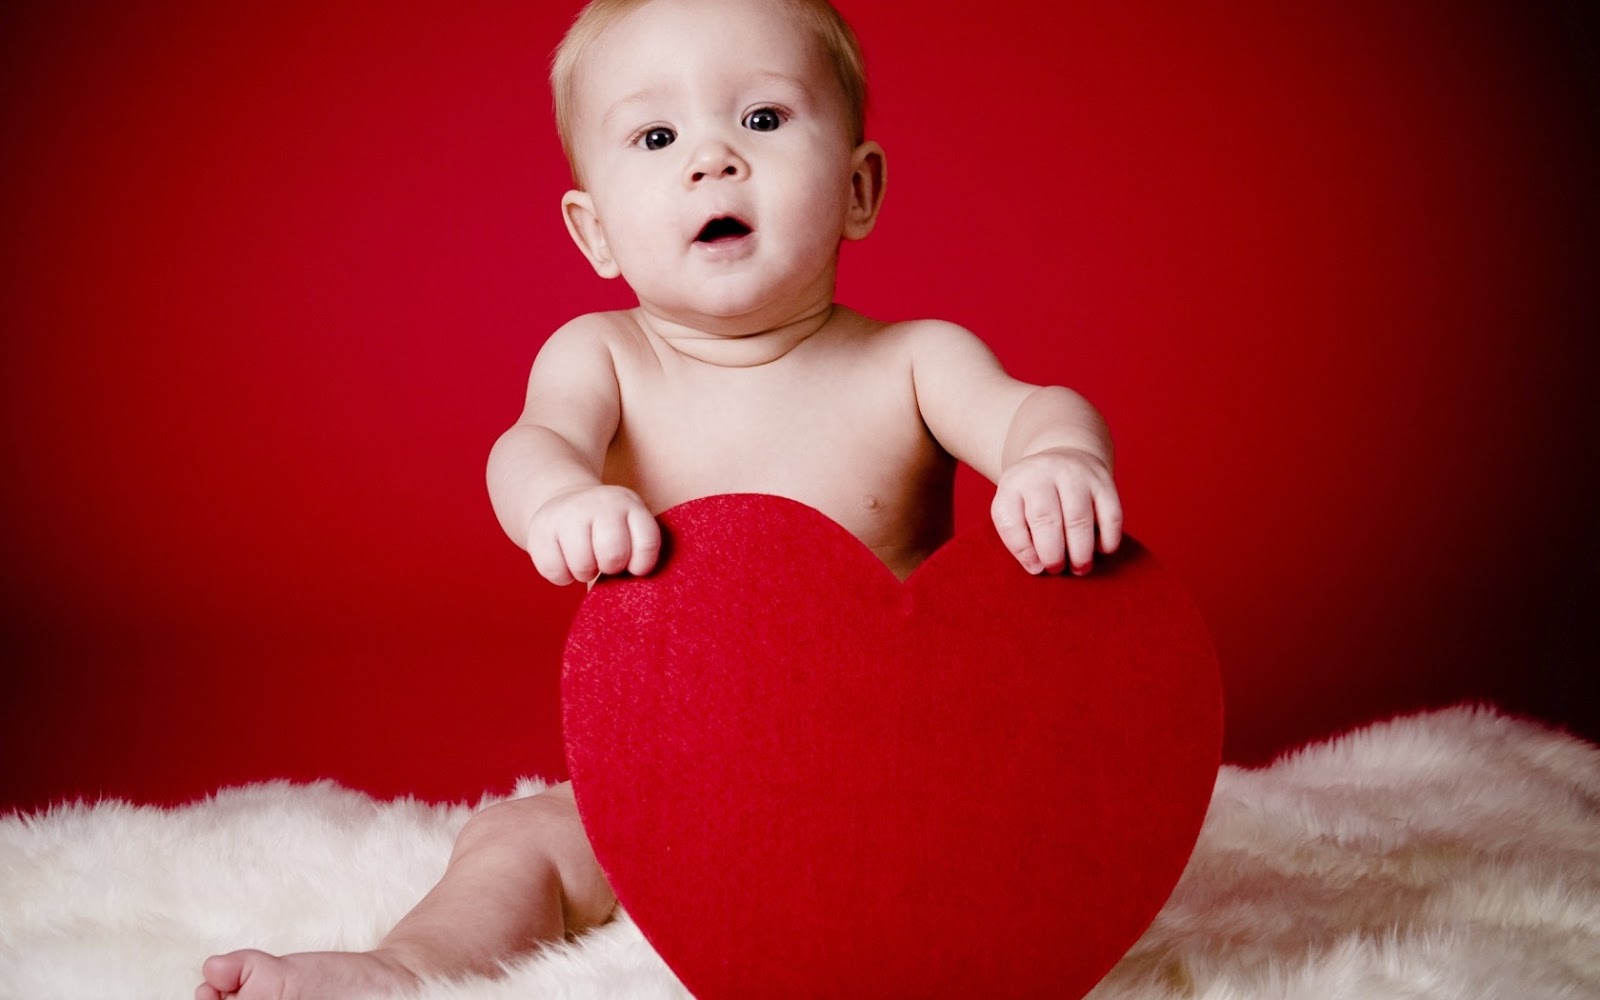 25+ photos of the cutest babies on Valentine's Day